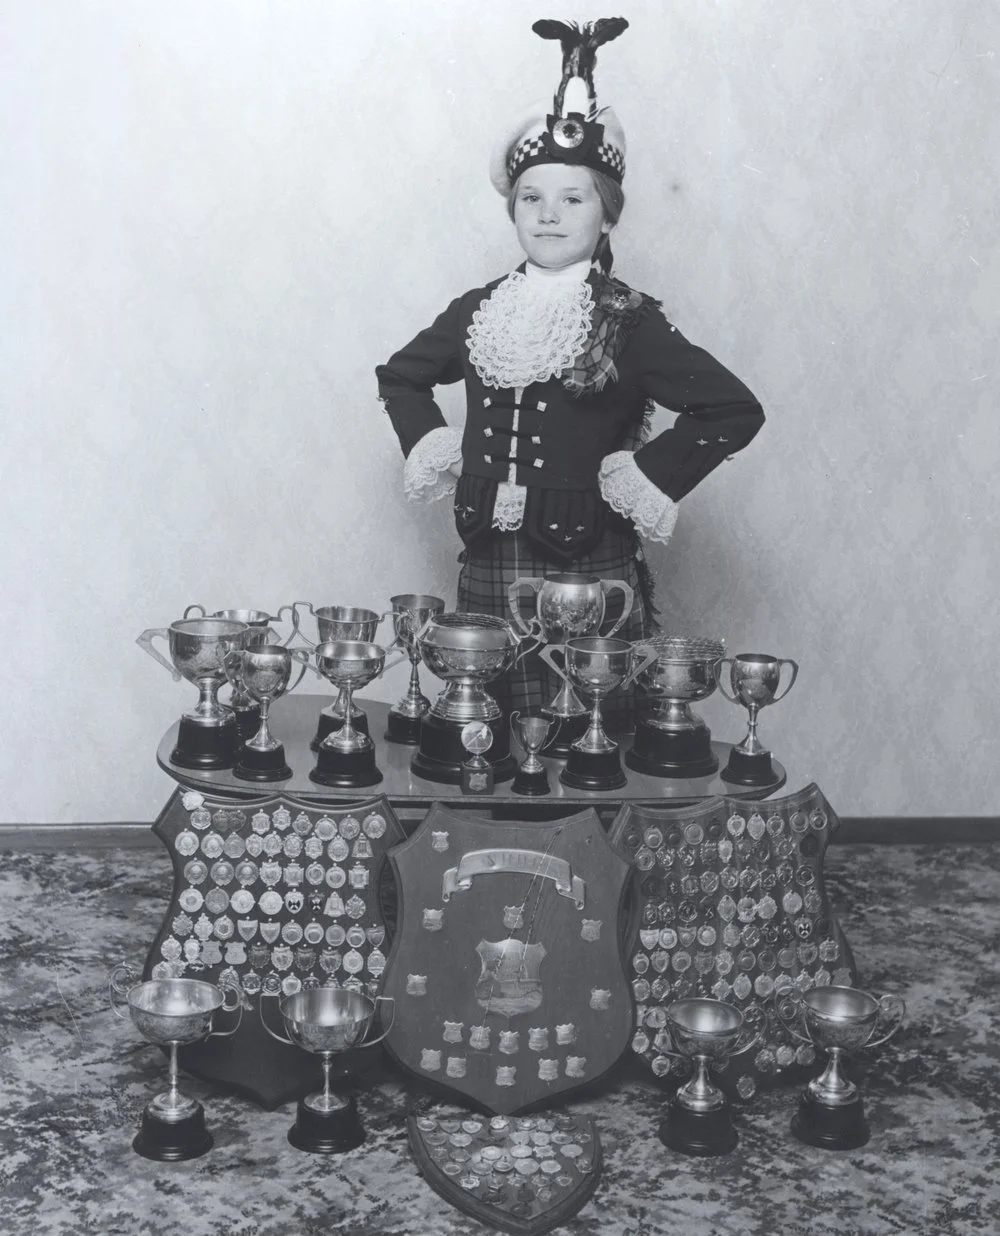 Tracey Watson with Highland dancing trophies. [P3-307-1382]